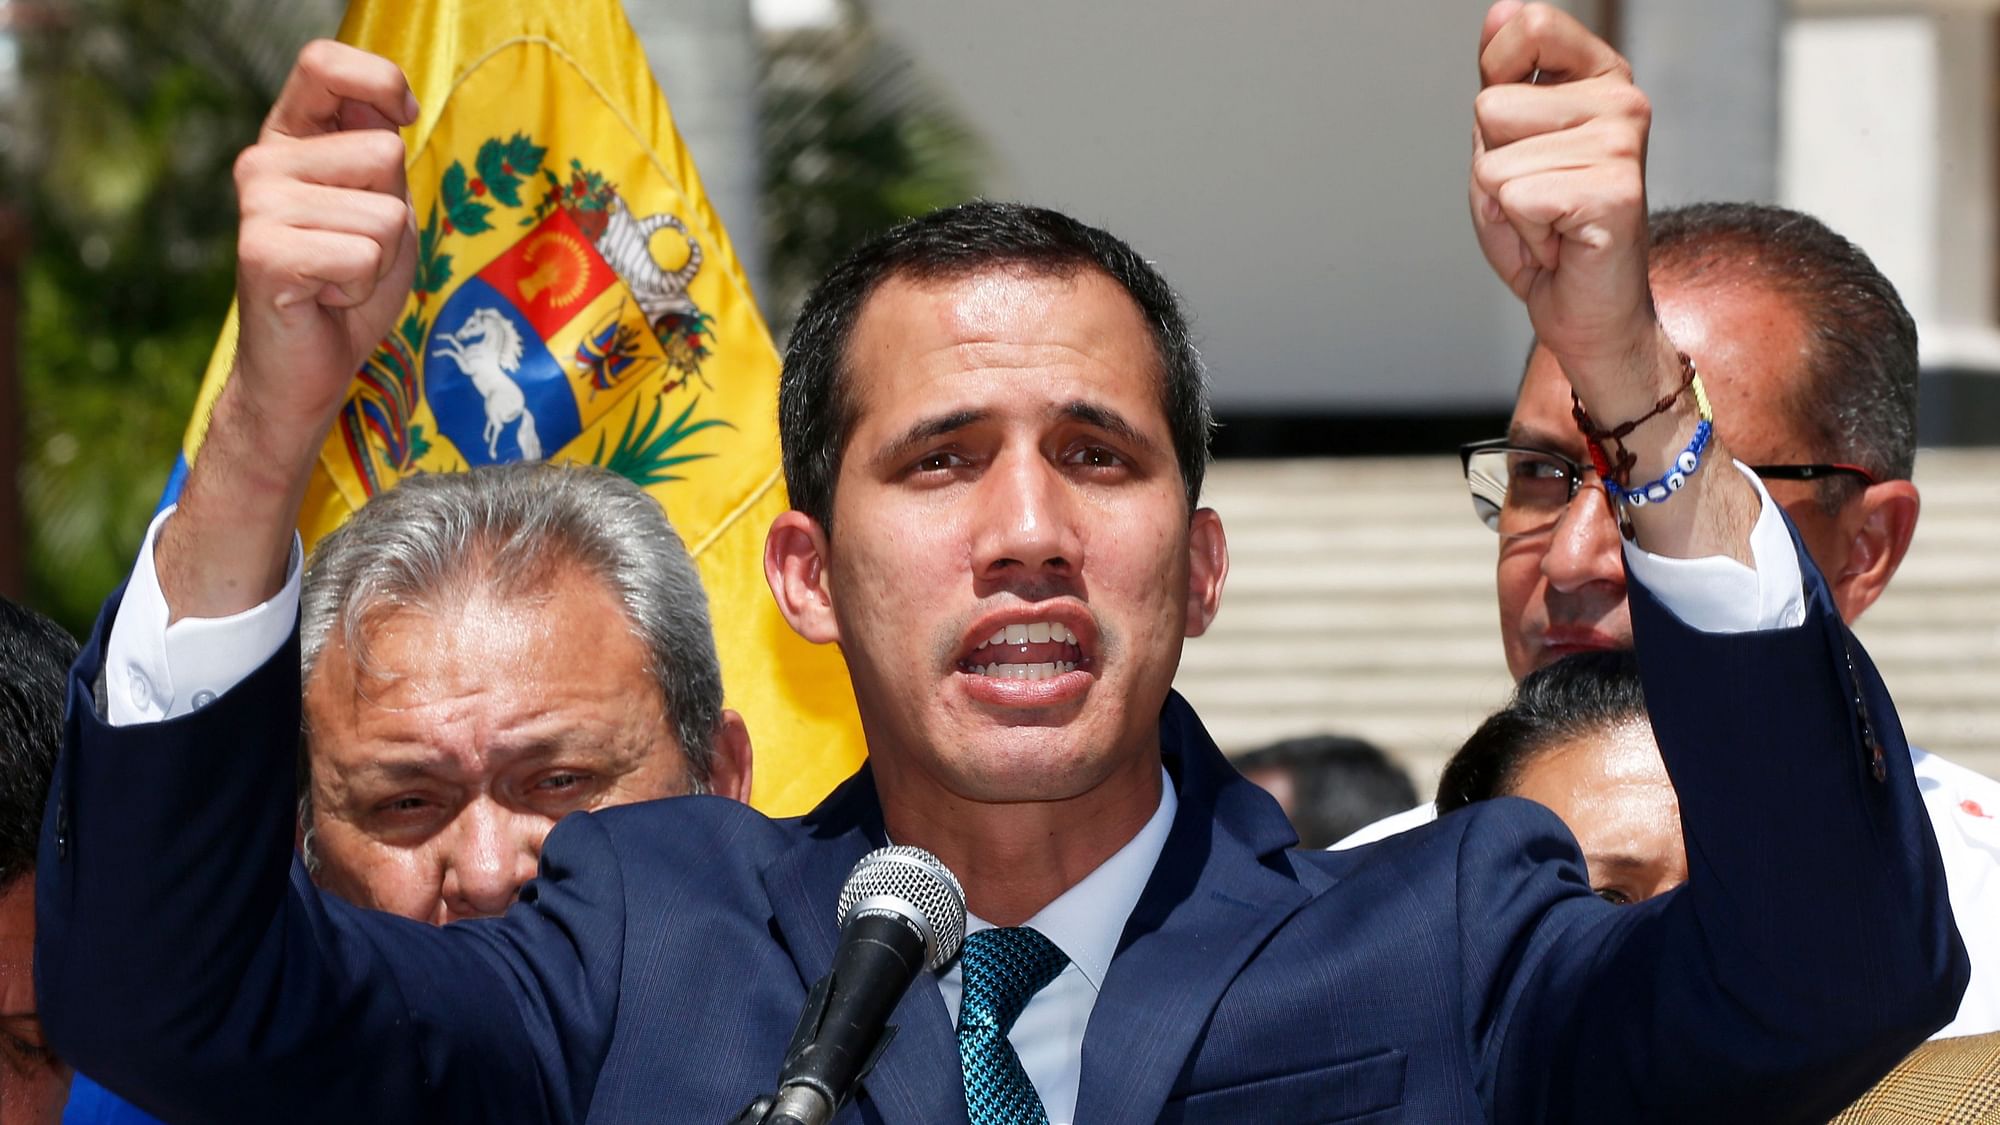 A press statement from the US State Department welcomed the decision to recognise Juan Guaido as Venezuela’s Interim President by more than a dozen European Union countries.